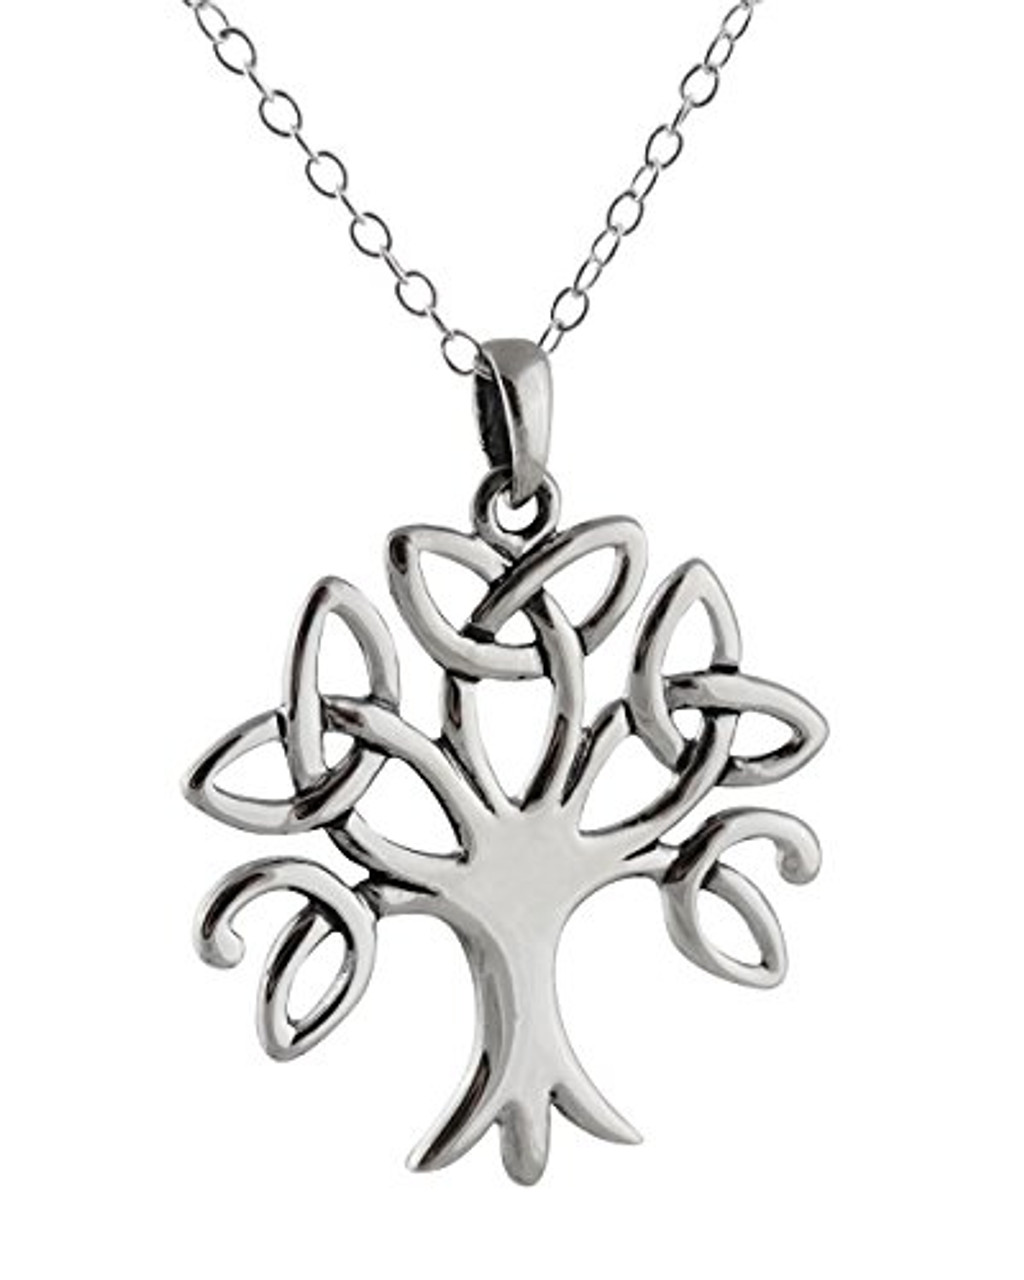 Celtic Tree Of Life Womens Sterling Silver-Plated & 18K Gold-Plated Irish Pendant  Necklace Featuring A Sculpted Tree With A Celtic Knot Design & Adorned With  Simulated Emeralds